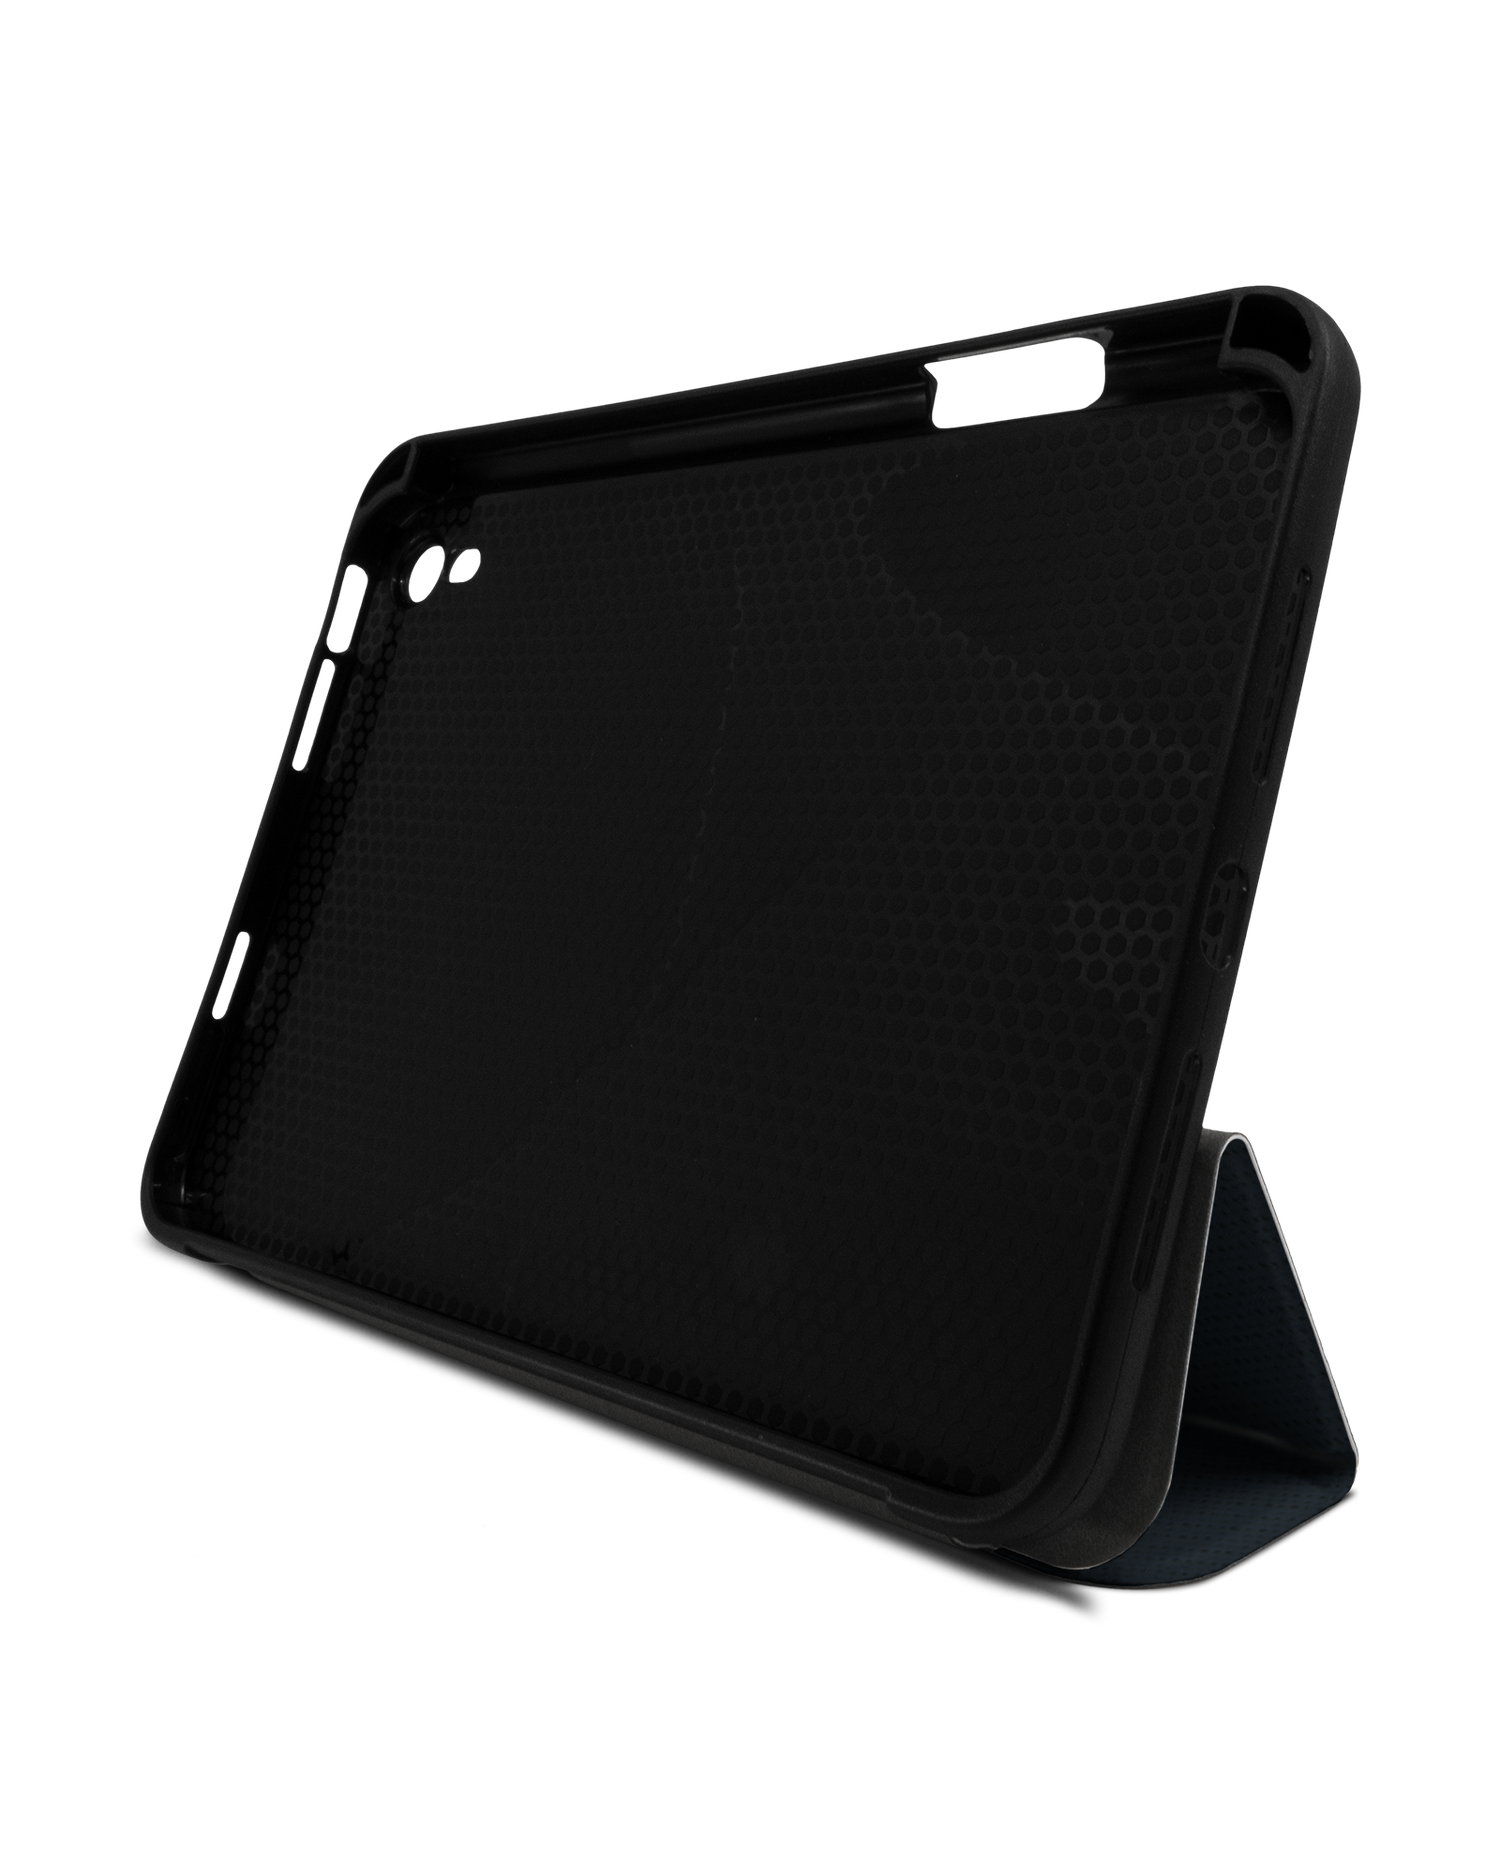 Oxford iPad Case with Pencil Holder Apple iPad mini 6 (2021): Set up in landscape format (front view)